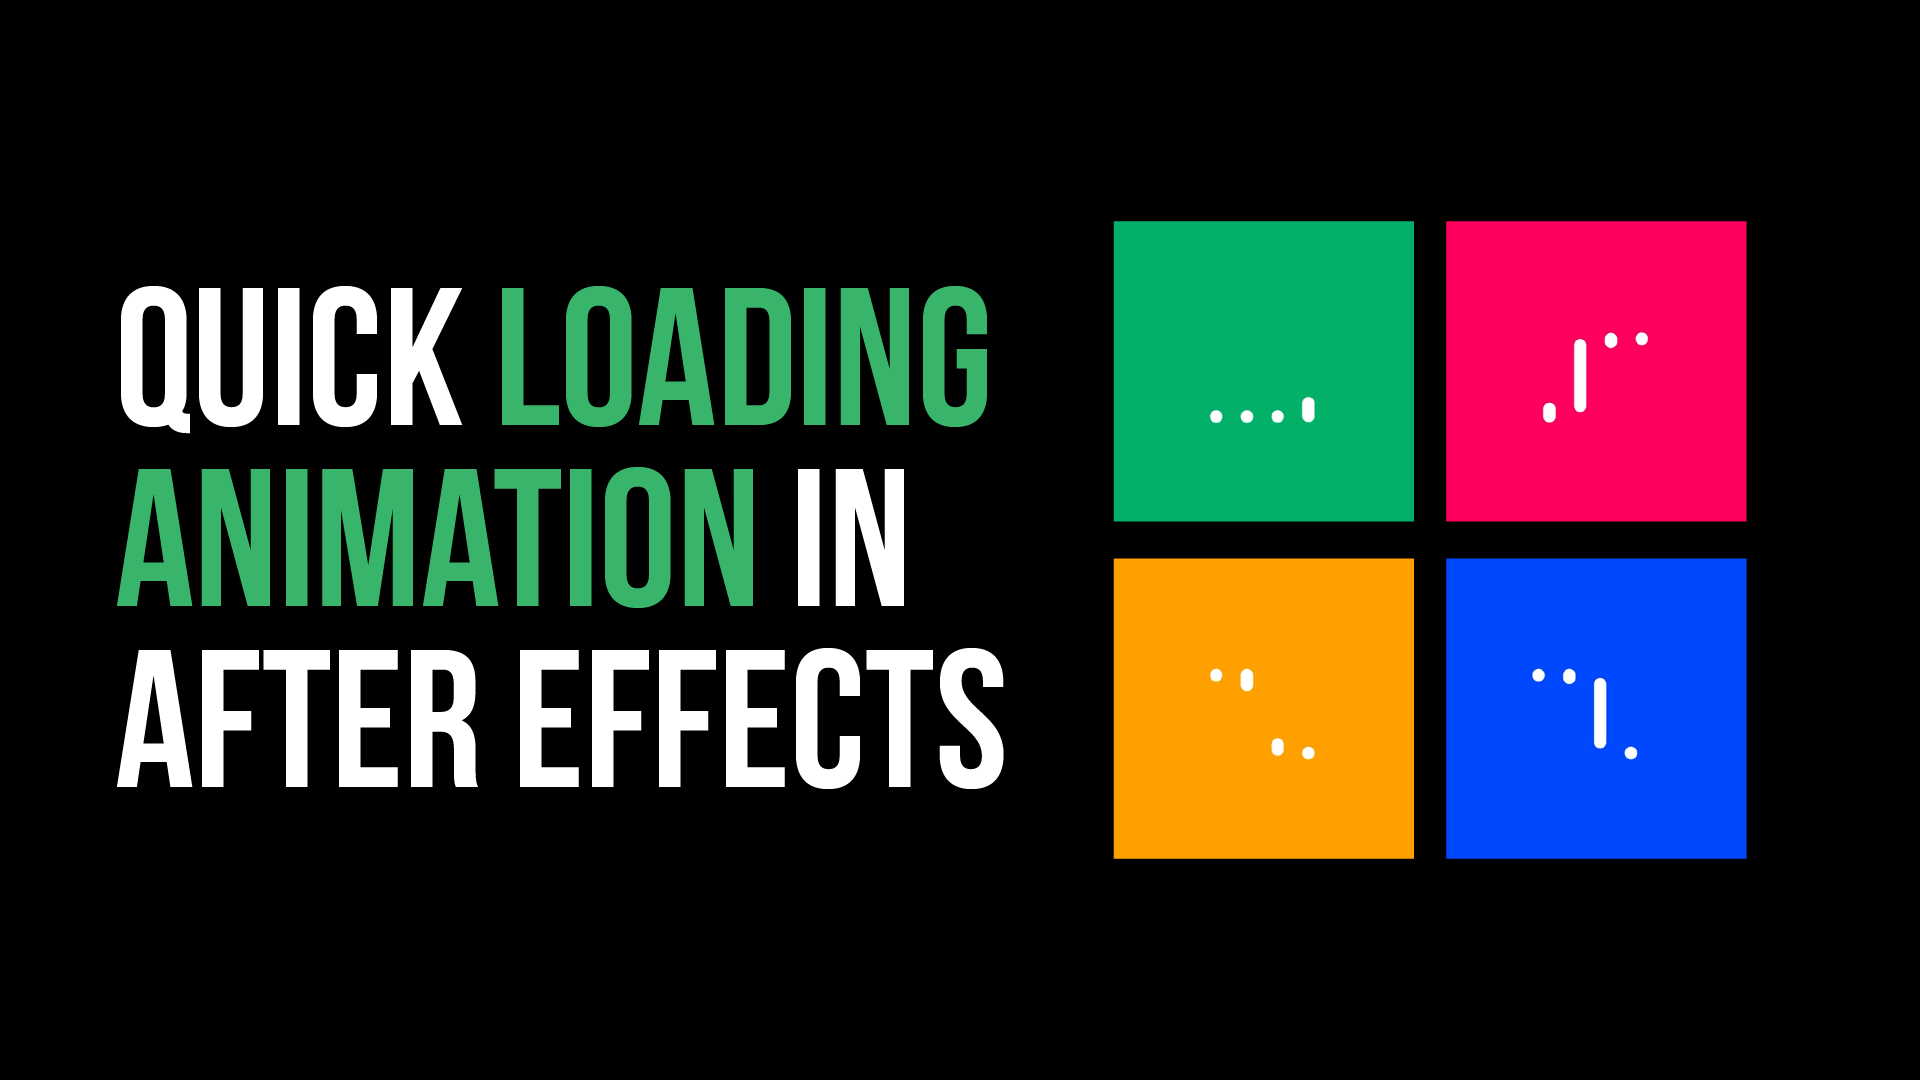 Quick Loading Animation in After Effects